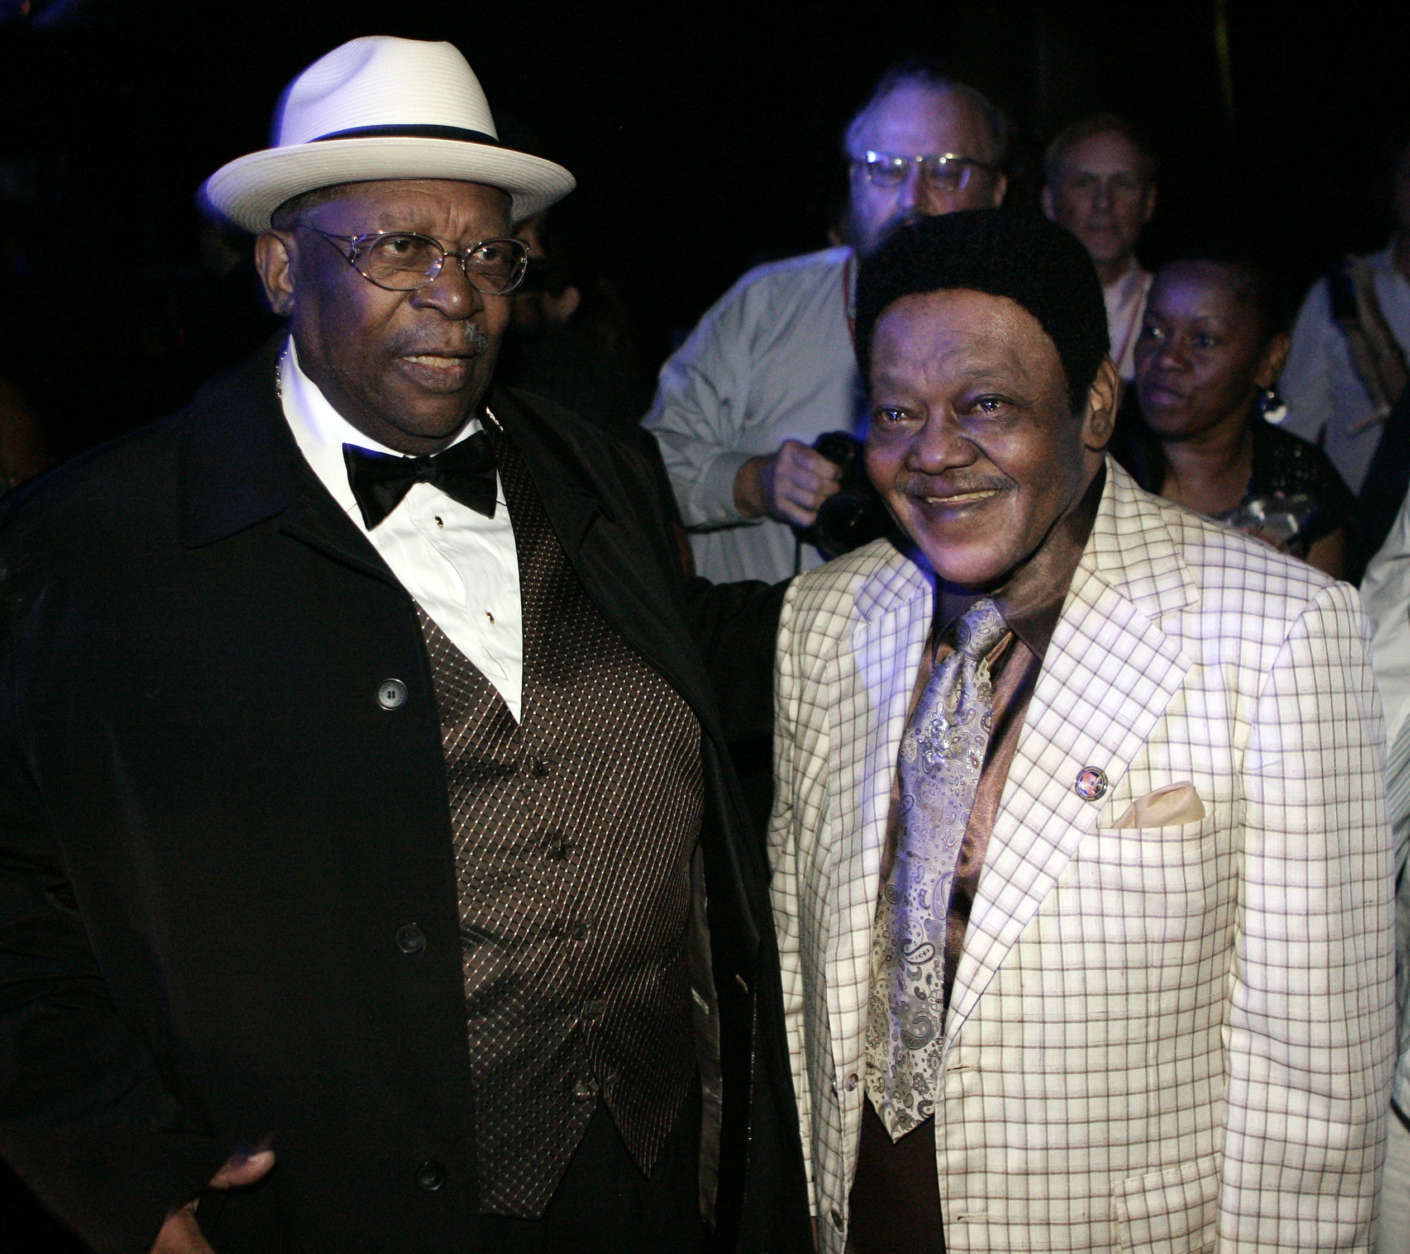 B.B. King visits with Fats Domino after King's performance at The Domino Effect, a tribute concert for Domino, at the New Orleans Arena in New Orleans, Saturday, May 30, 2009. A portion of the proceeds from the concert will go to New Orleans Saints quarterback Drew Brees' charitable foundation, the Brees Dream Foundation, which aims to improve local playgrounds and recreation sites in New Orleans. (AP Photo/Patrick Semansky)